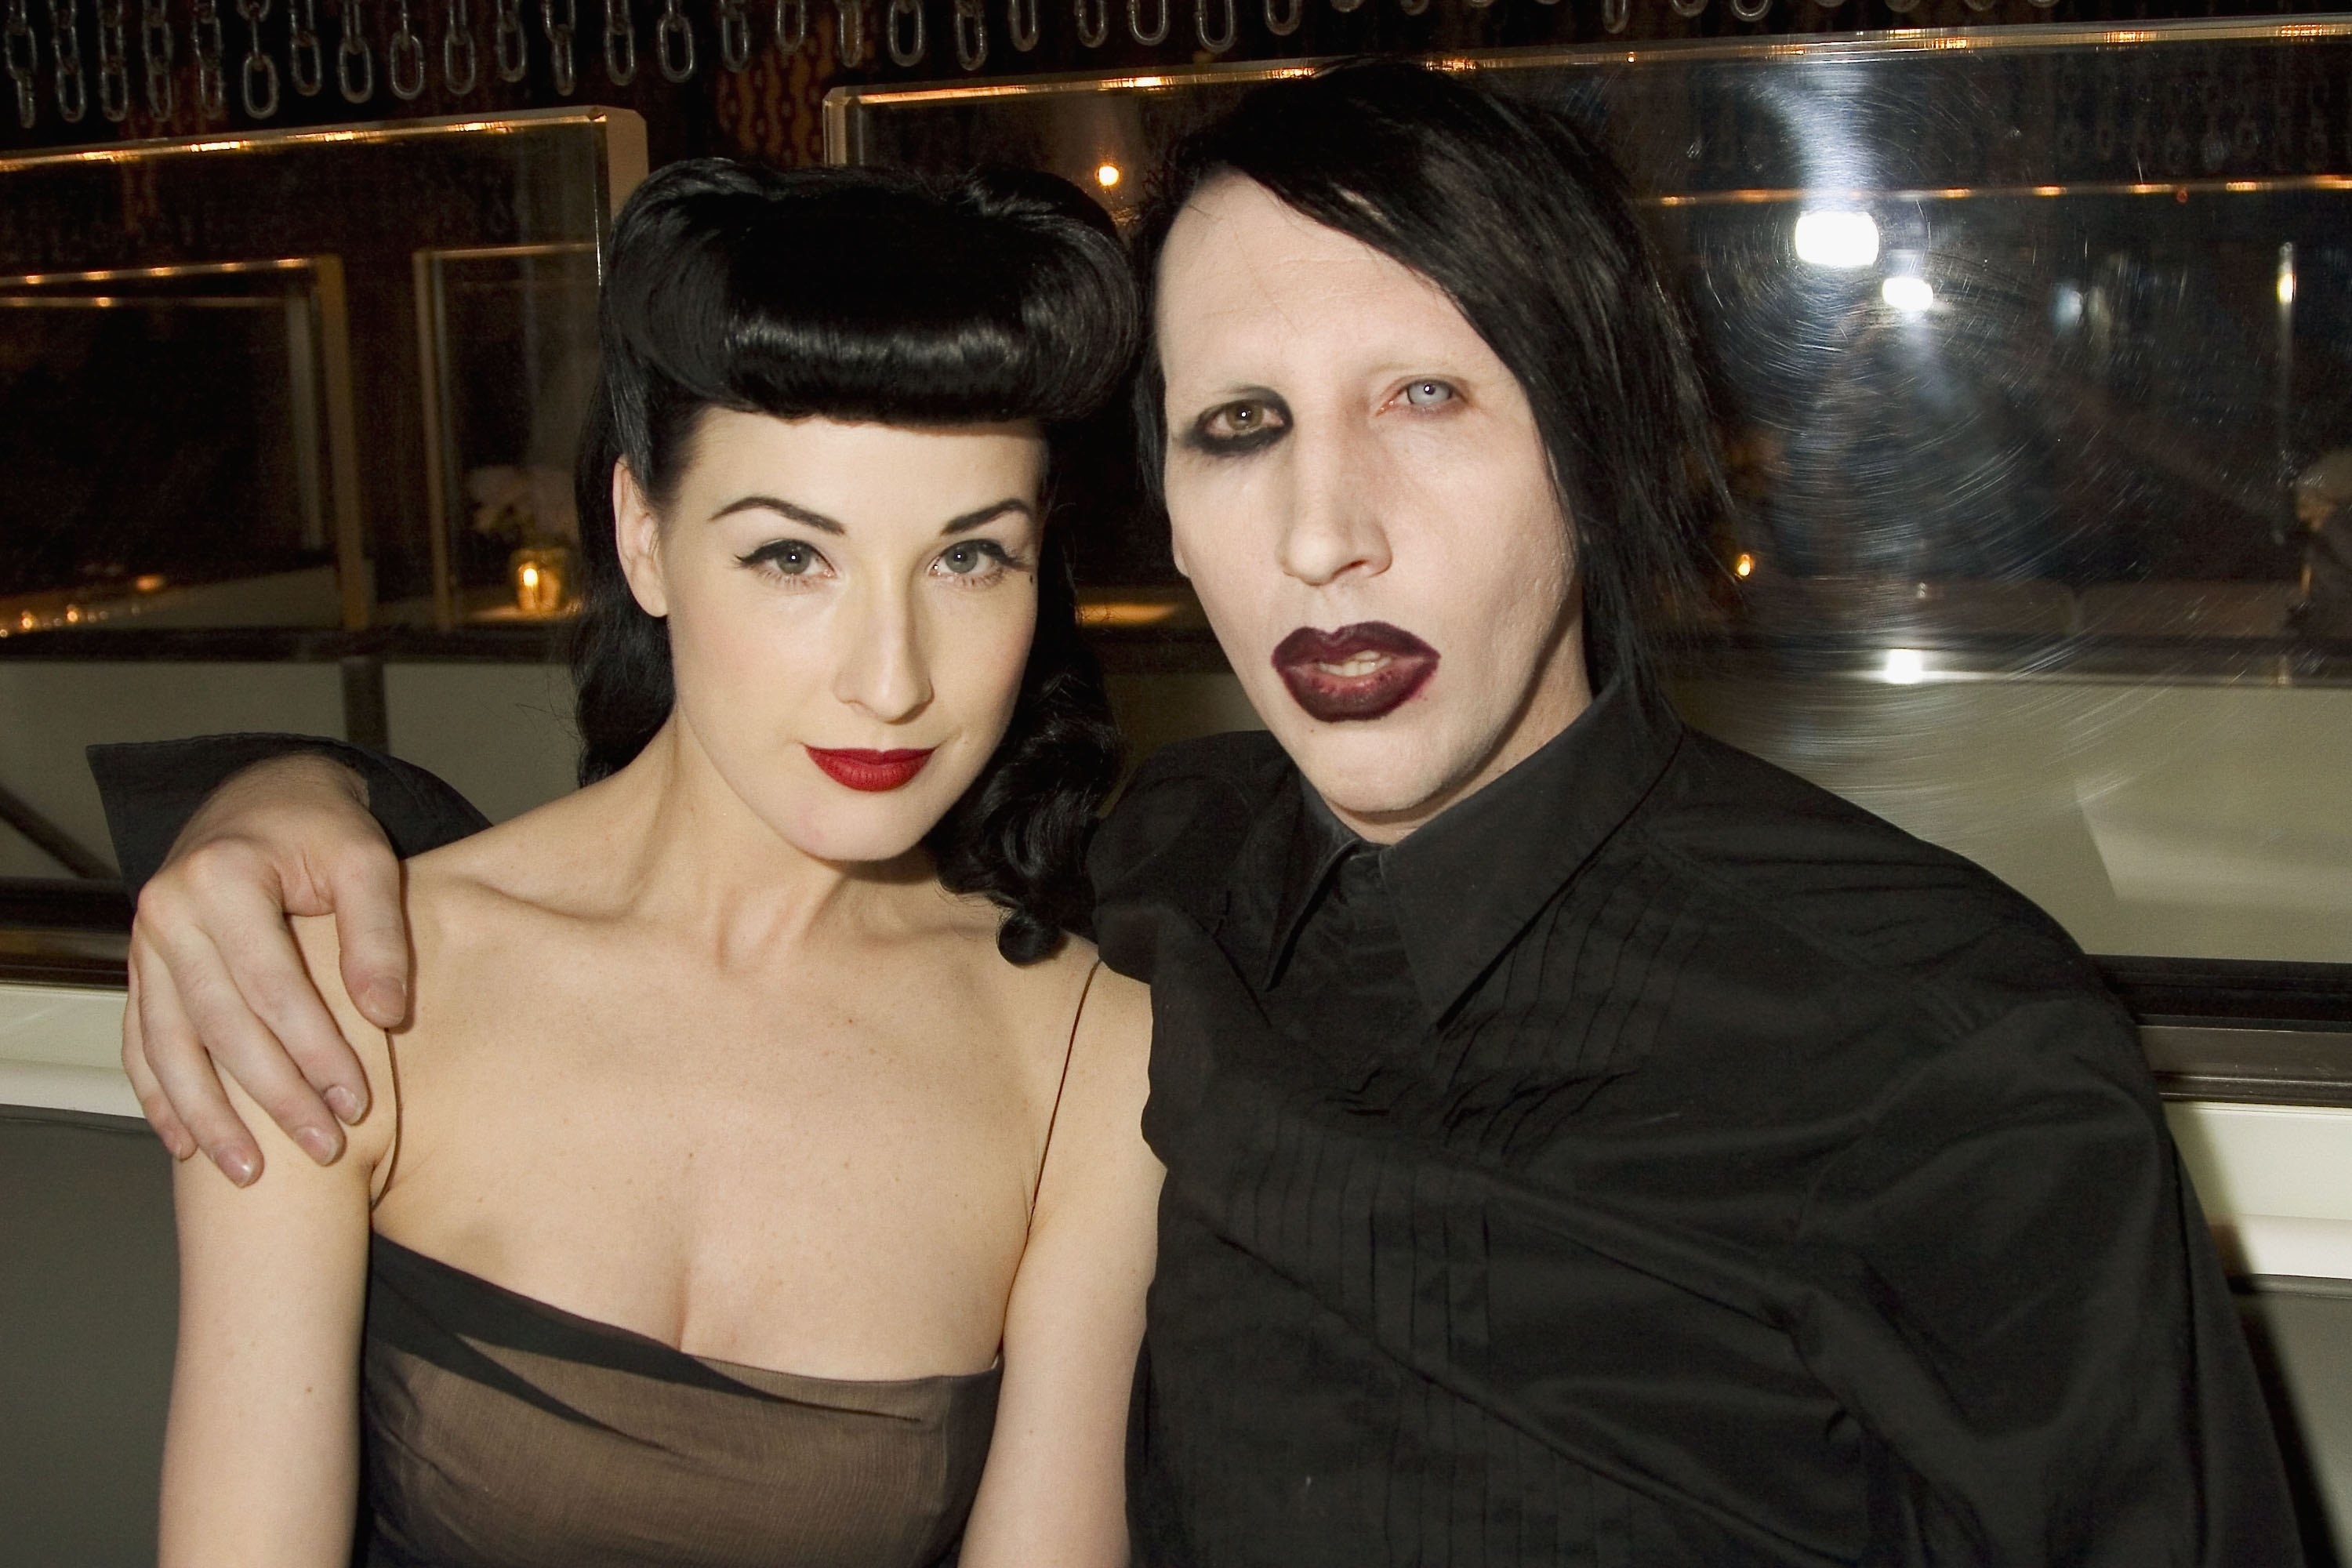 What Did Marilyn Manson Do? Brian Warner's Abuse Allegations